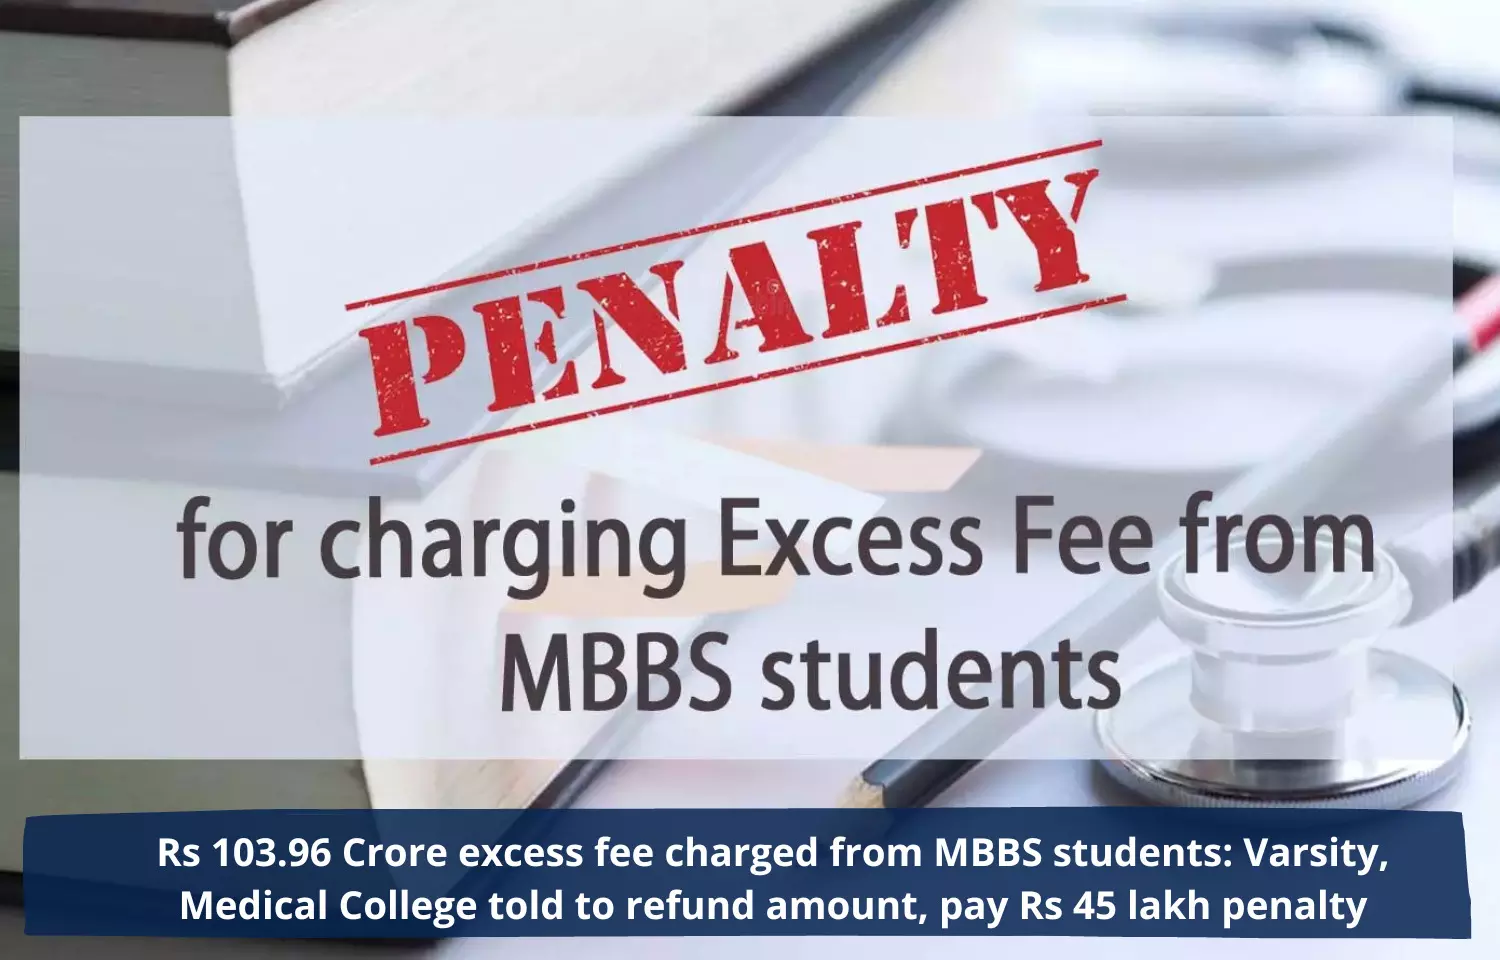 Medical College, varsity told to refund amount, pay Rs 45 lakh penalty